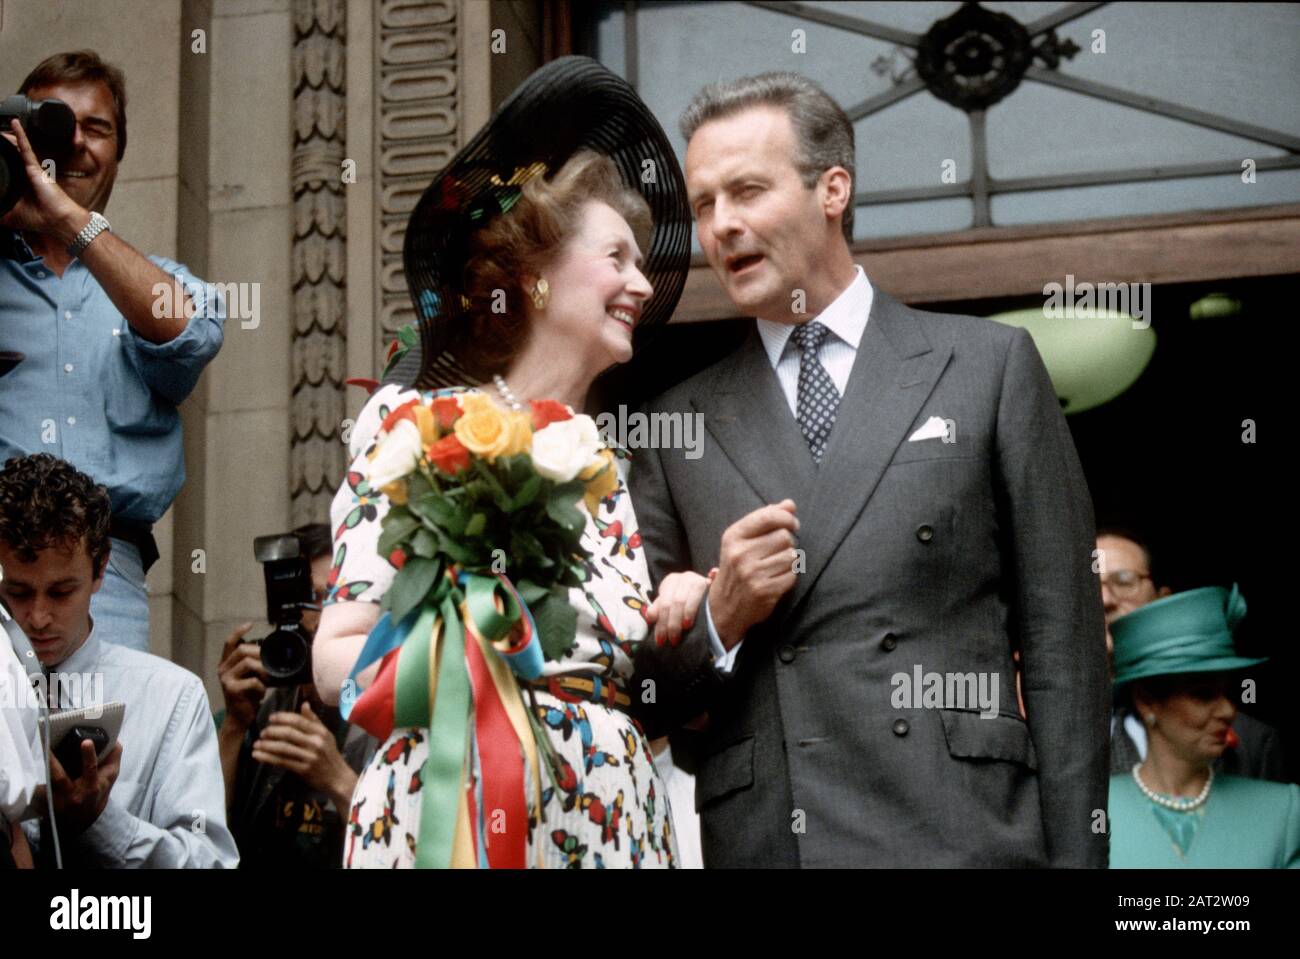 Raine, The Countess Spencer - Raine de Chambrun and Count Jean-Francois  Pineton de Chambrun on the day of their wedding at Marylebone register  office Stock Photo - Alamy